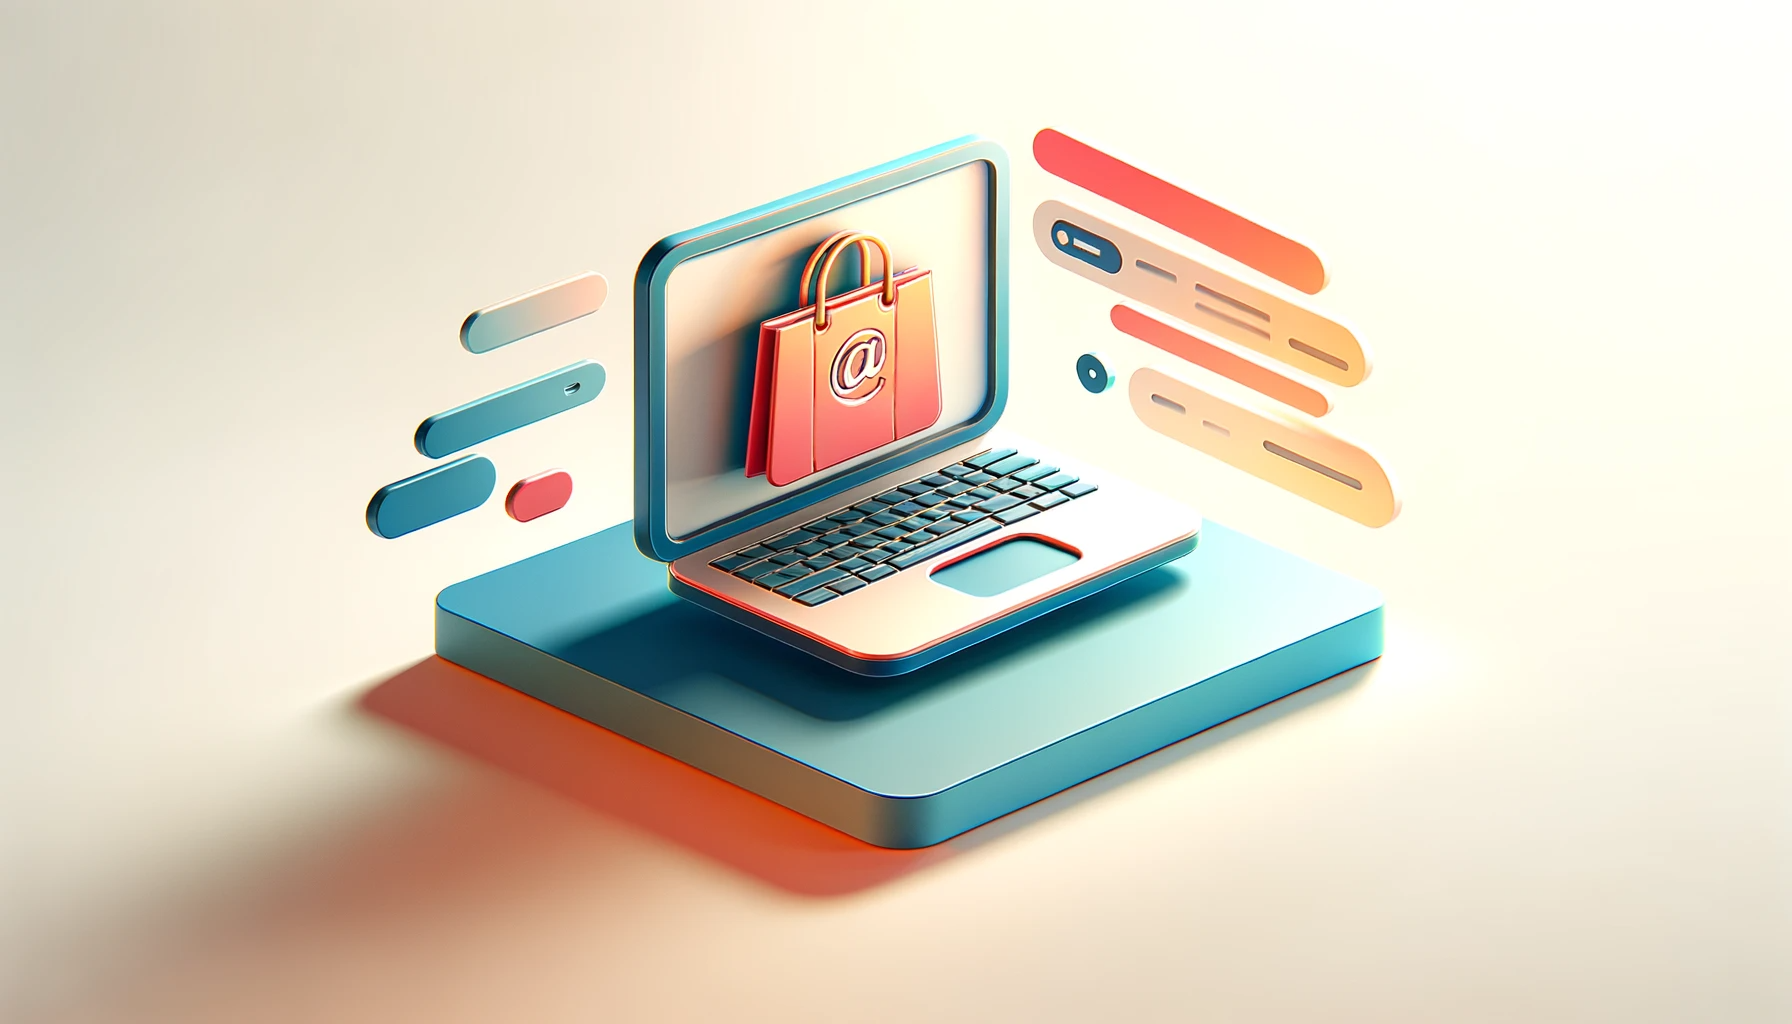 laptop in 3D icon style and an icon for purchased product 